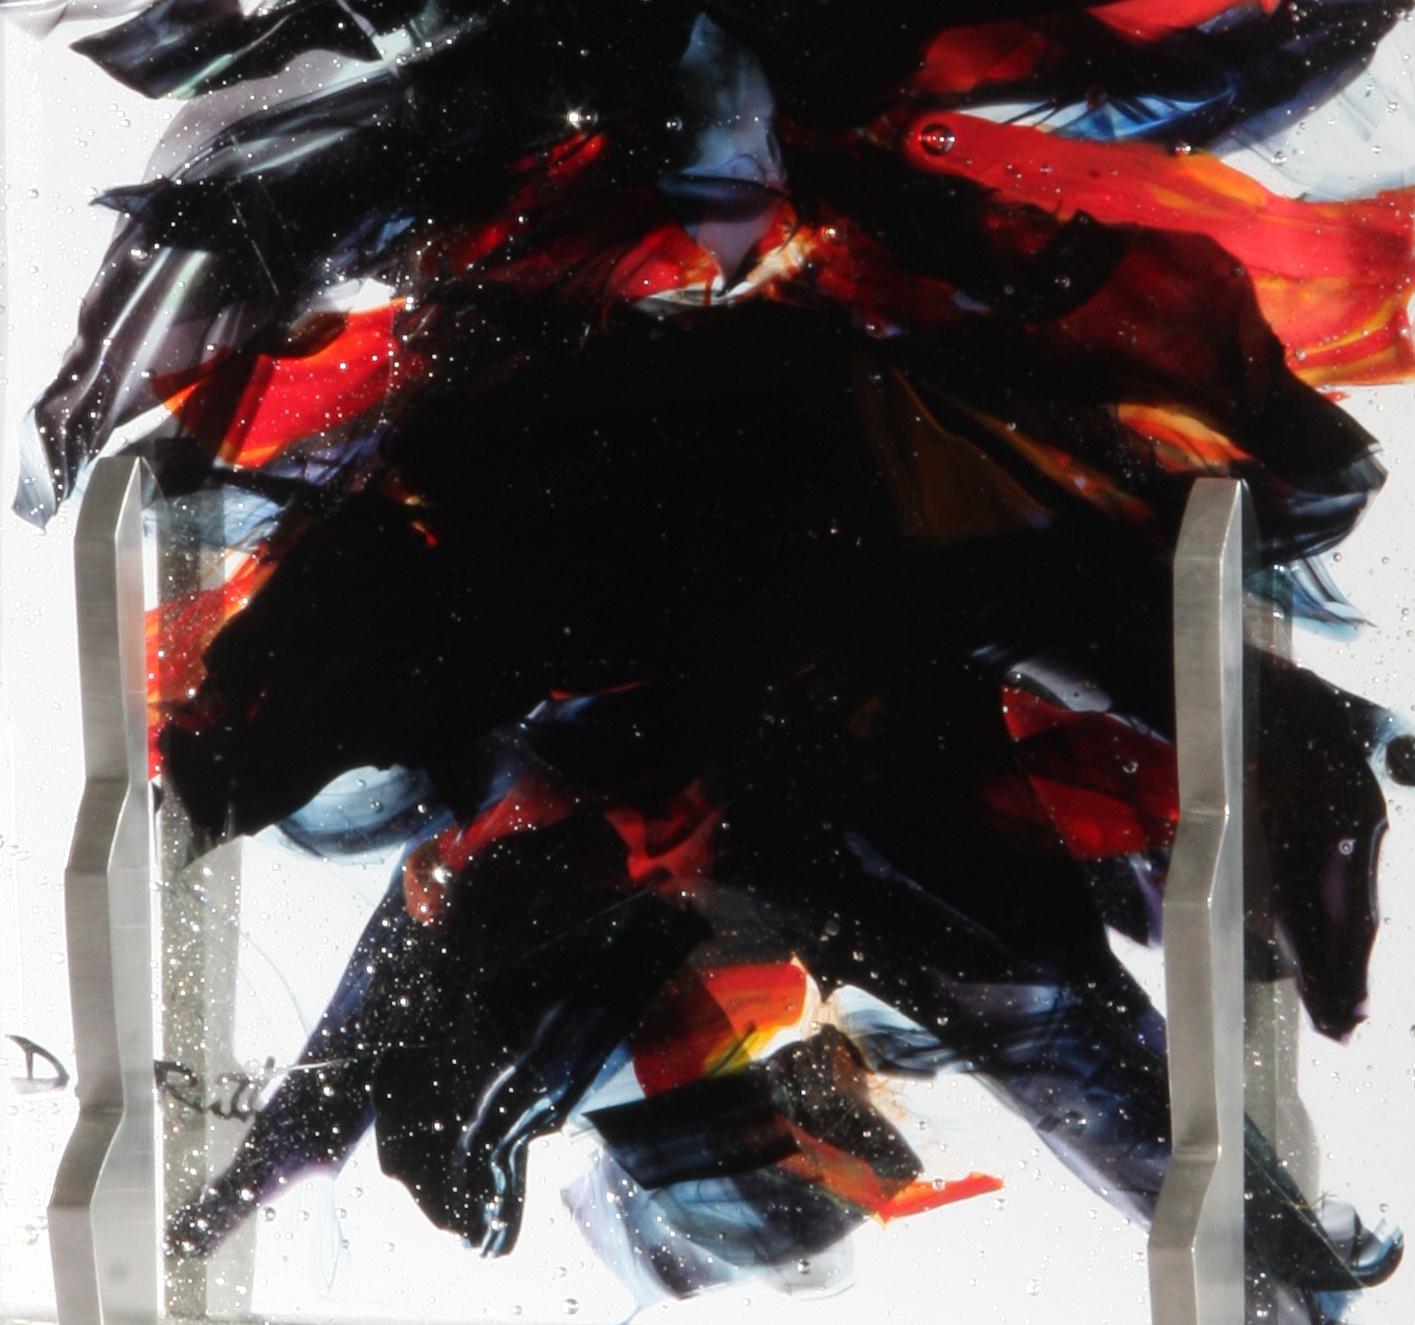 'Yaroi' is a contemporary abstract cast glass sculpture by David Ruth from his Internal Space series. It features painterly brushstroke formations in glass called trails. These trails are in colors of black, orange, blue and red. Trails are created